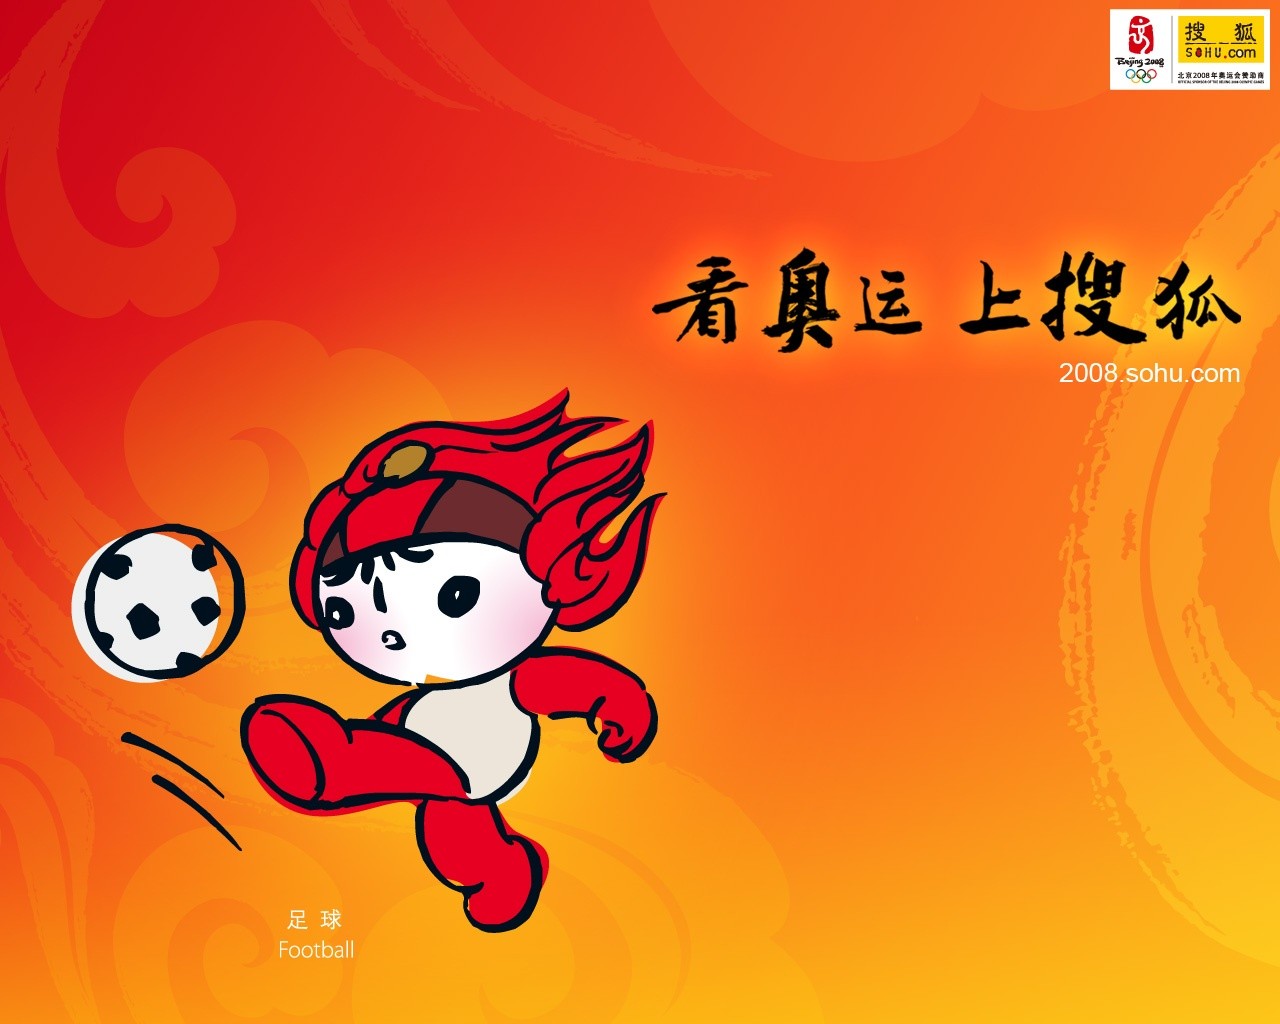 08 Olympic Games Fuwa Wallpapers #39 - 1280x1024